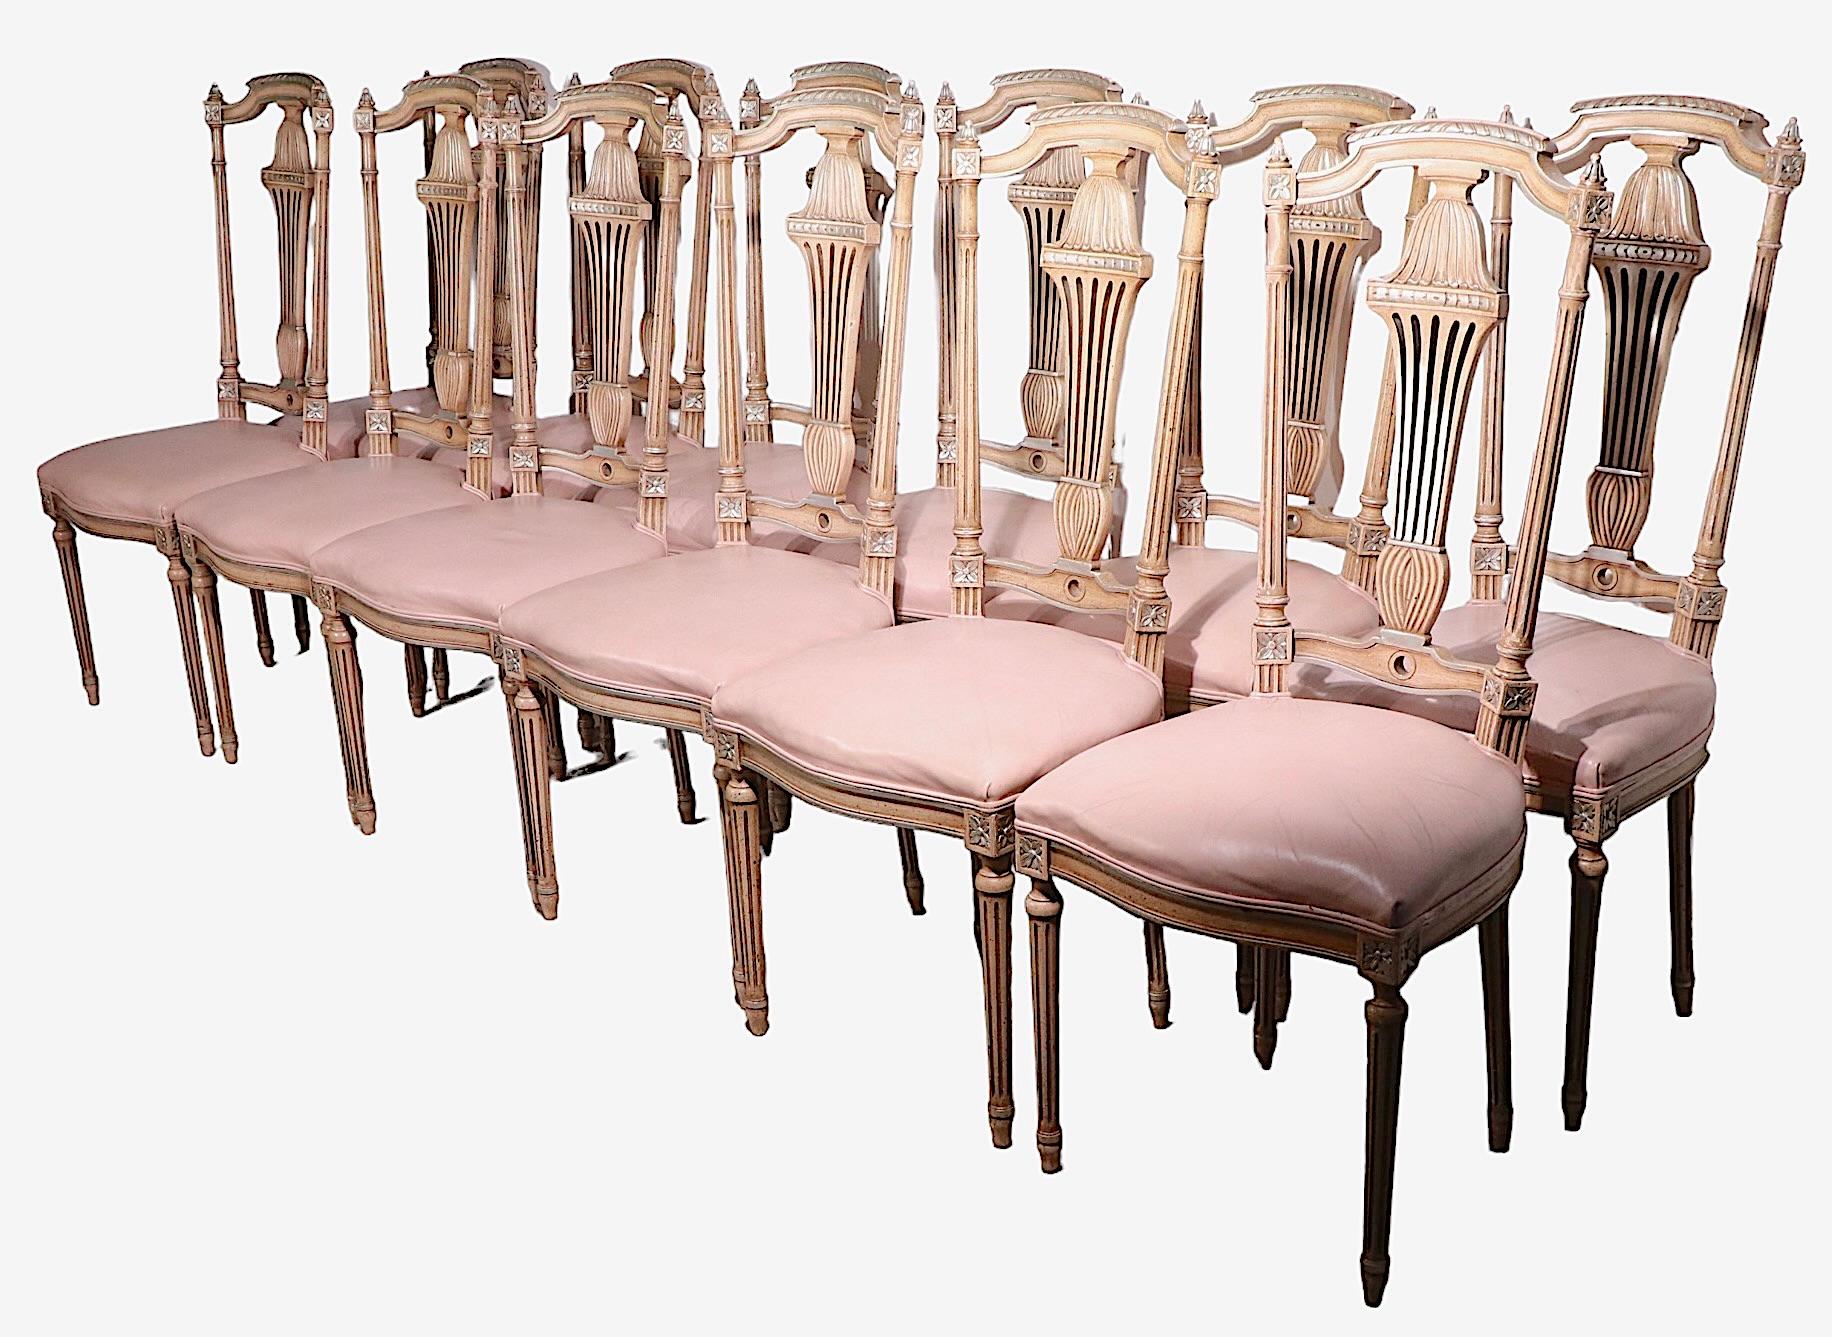 Decorative Set of 12 Italian Style Dining Chairs of Carved Wood and Leather For Sale 3